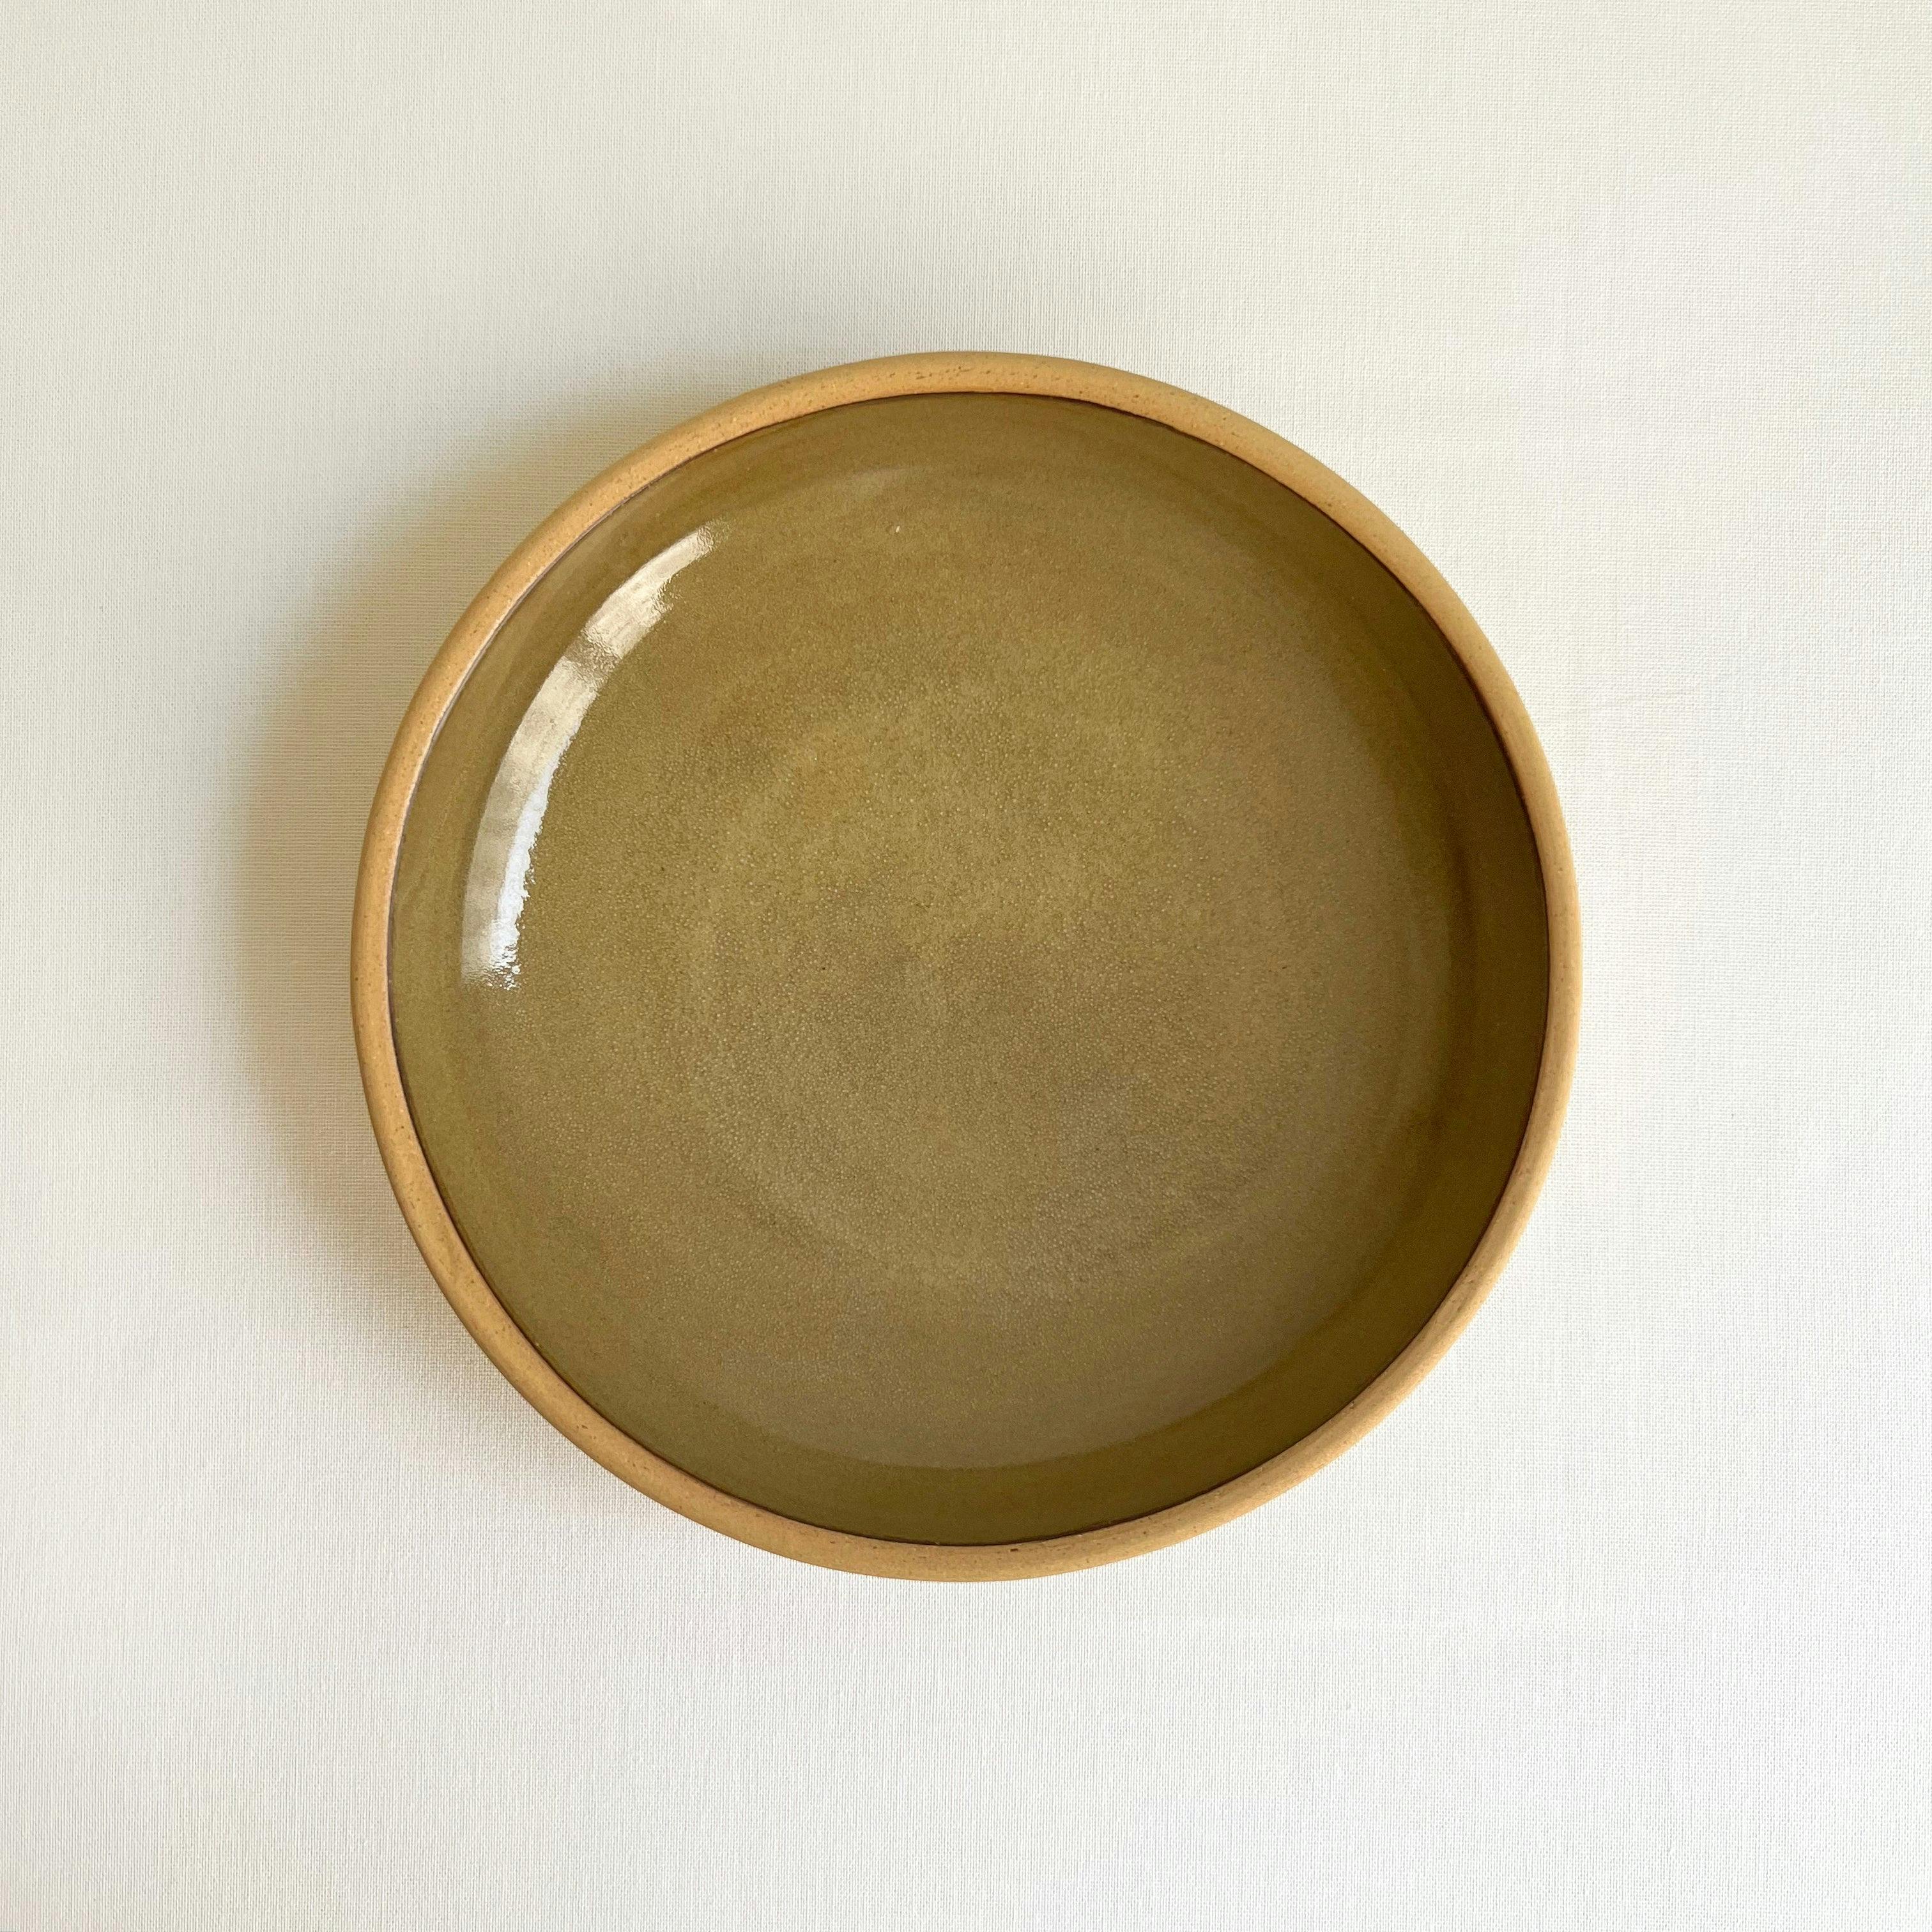 Everyday Bowl in Bay Leaf, a product by Midori Collective